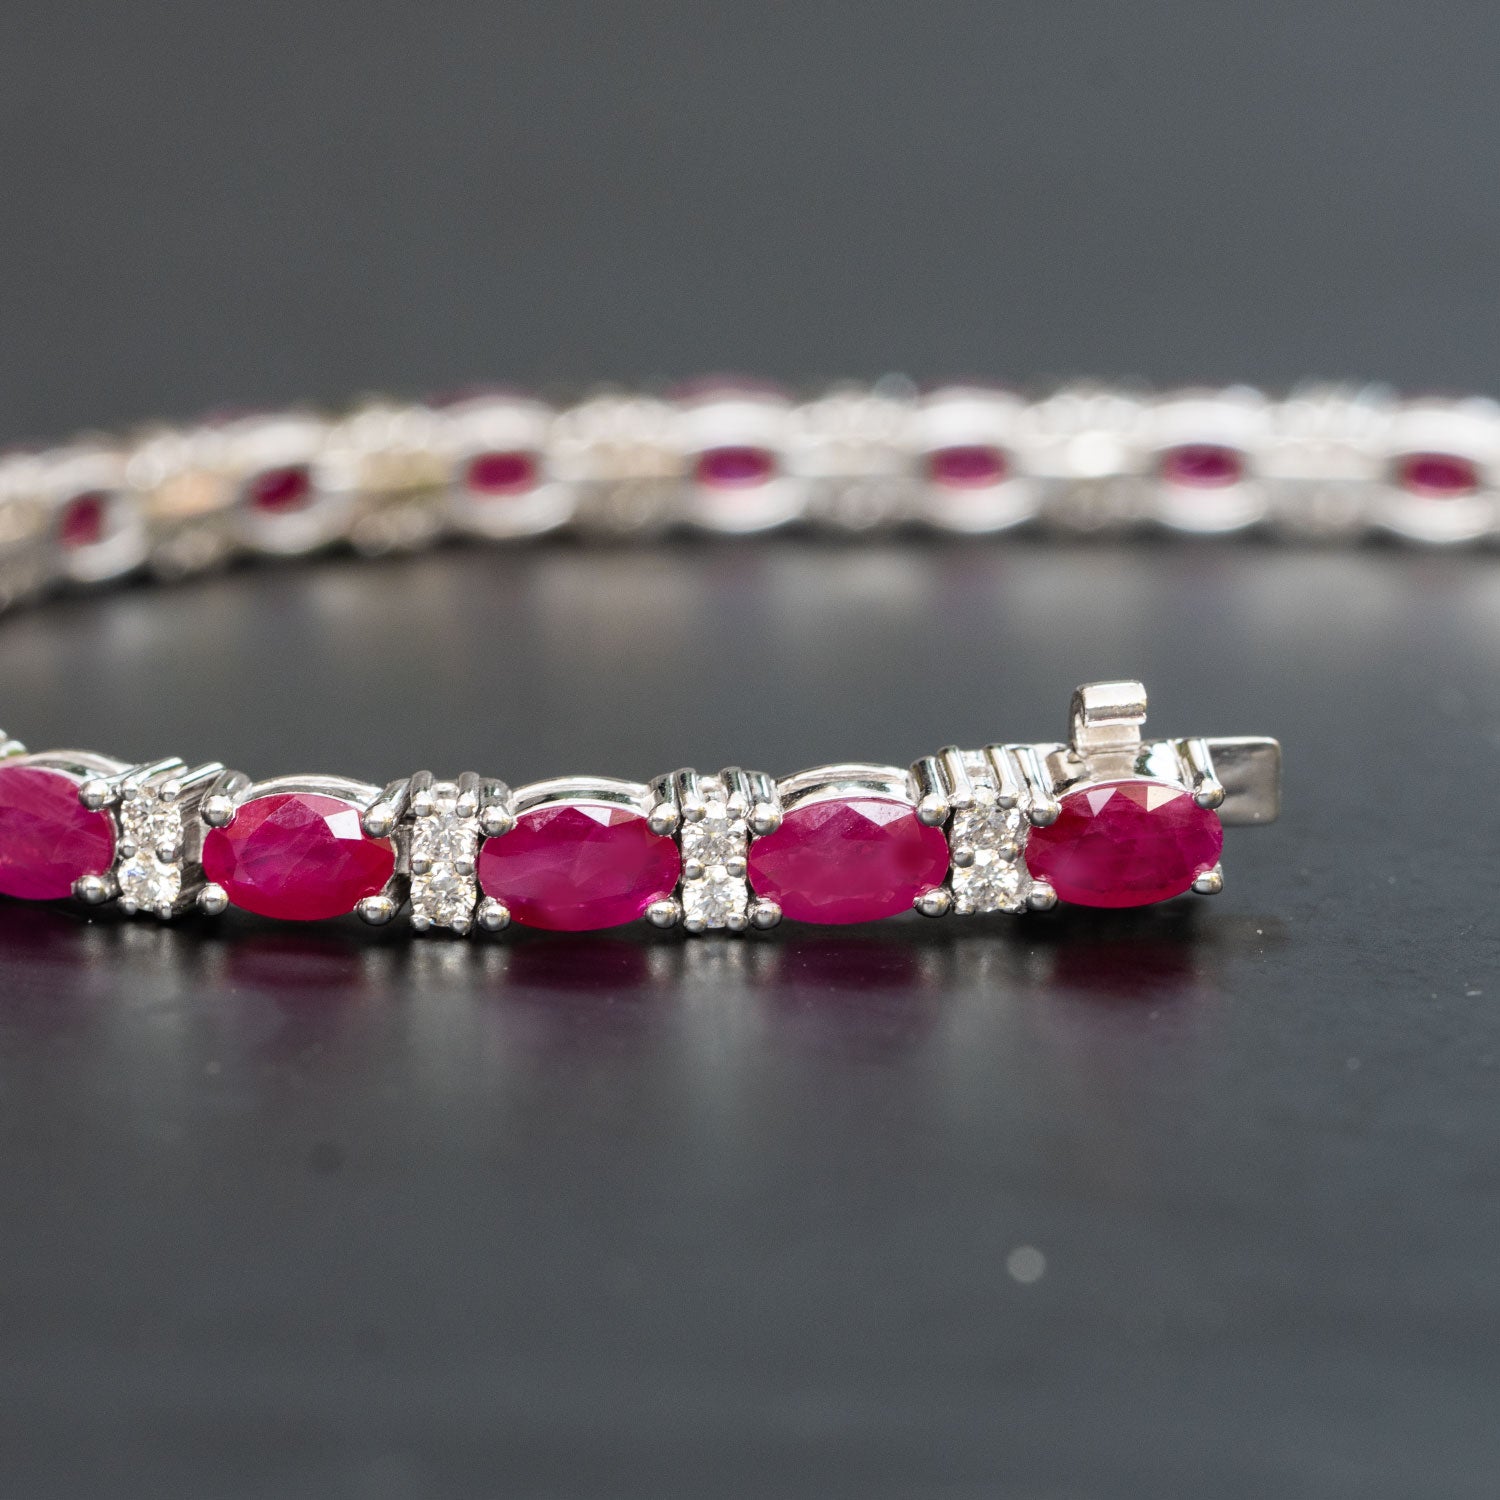 Amazon.com: Natural Ruby Bracelet, Ruby Bracelet, Ruby Bracelet Silver,  Gifts For Her, White Gold Plated Silver, Bracelets for Women : Handmade  Products